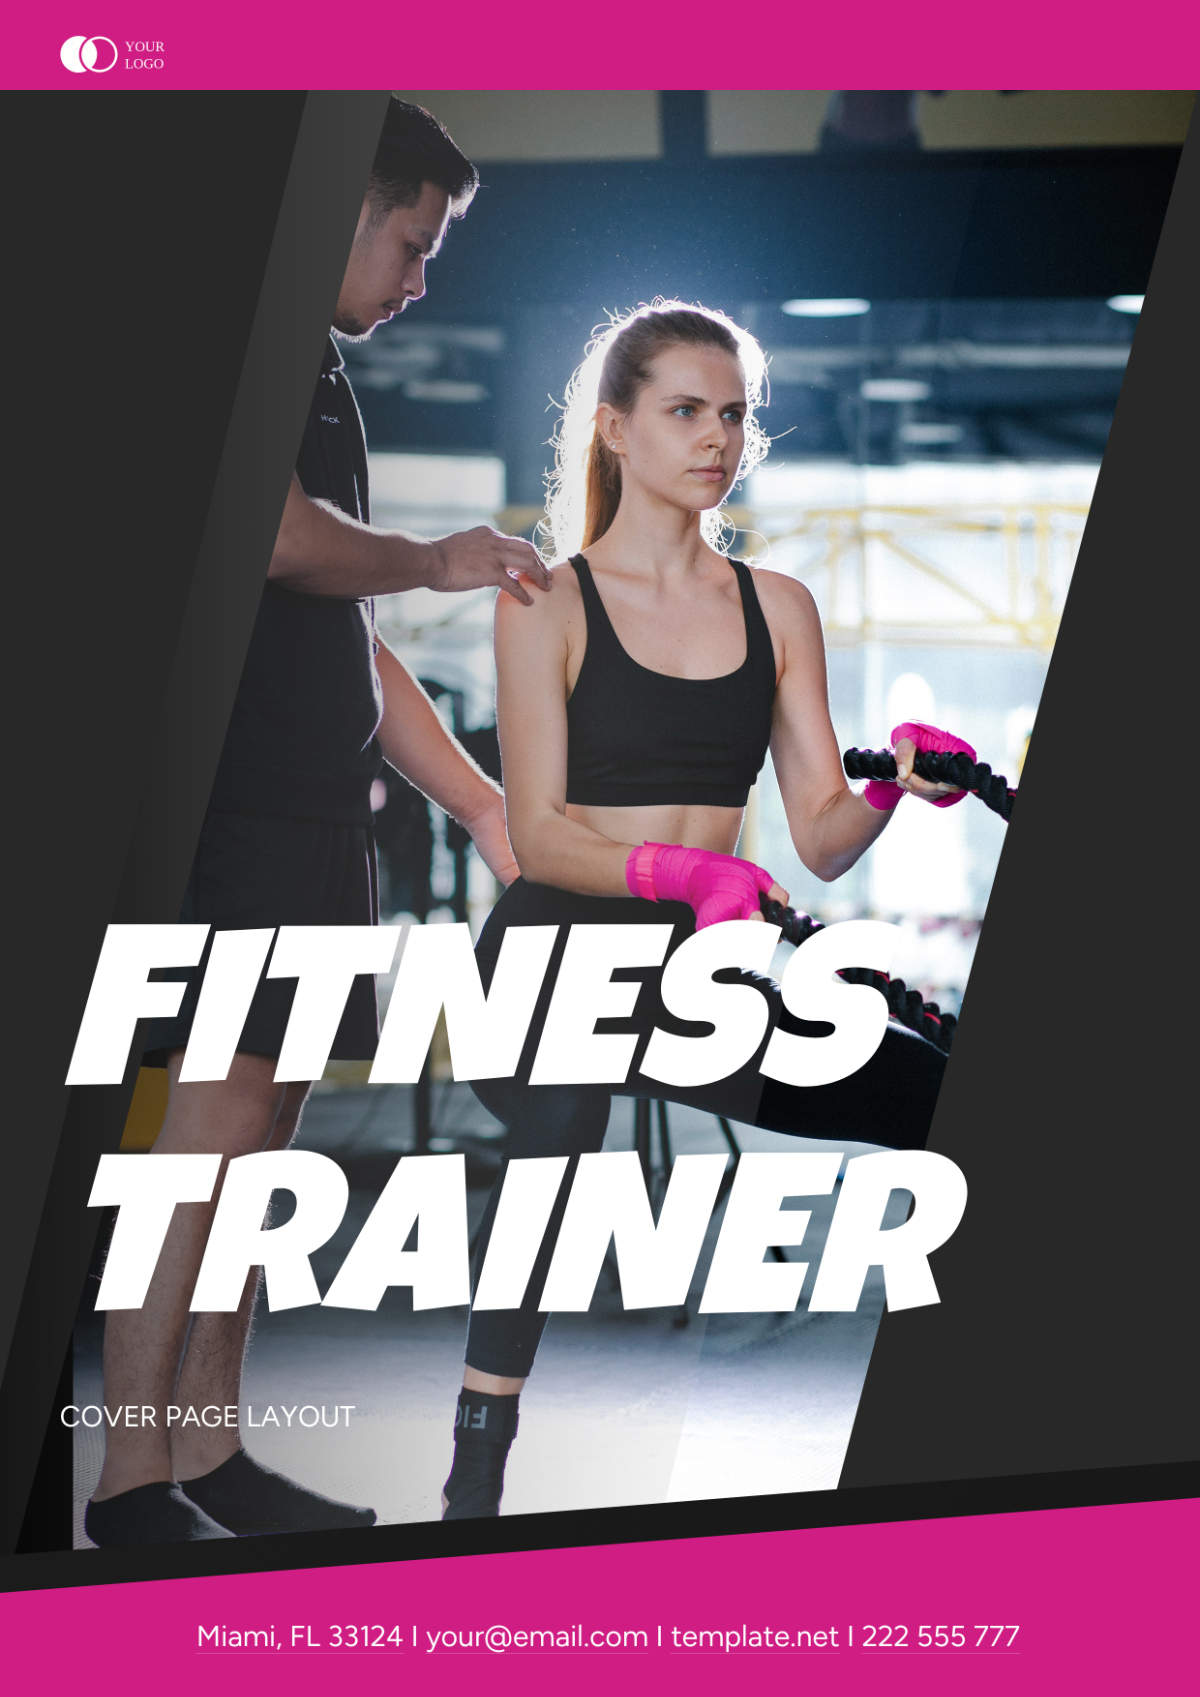 Fitness Trainer Cover Page Layout Template